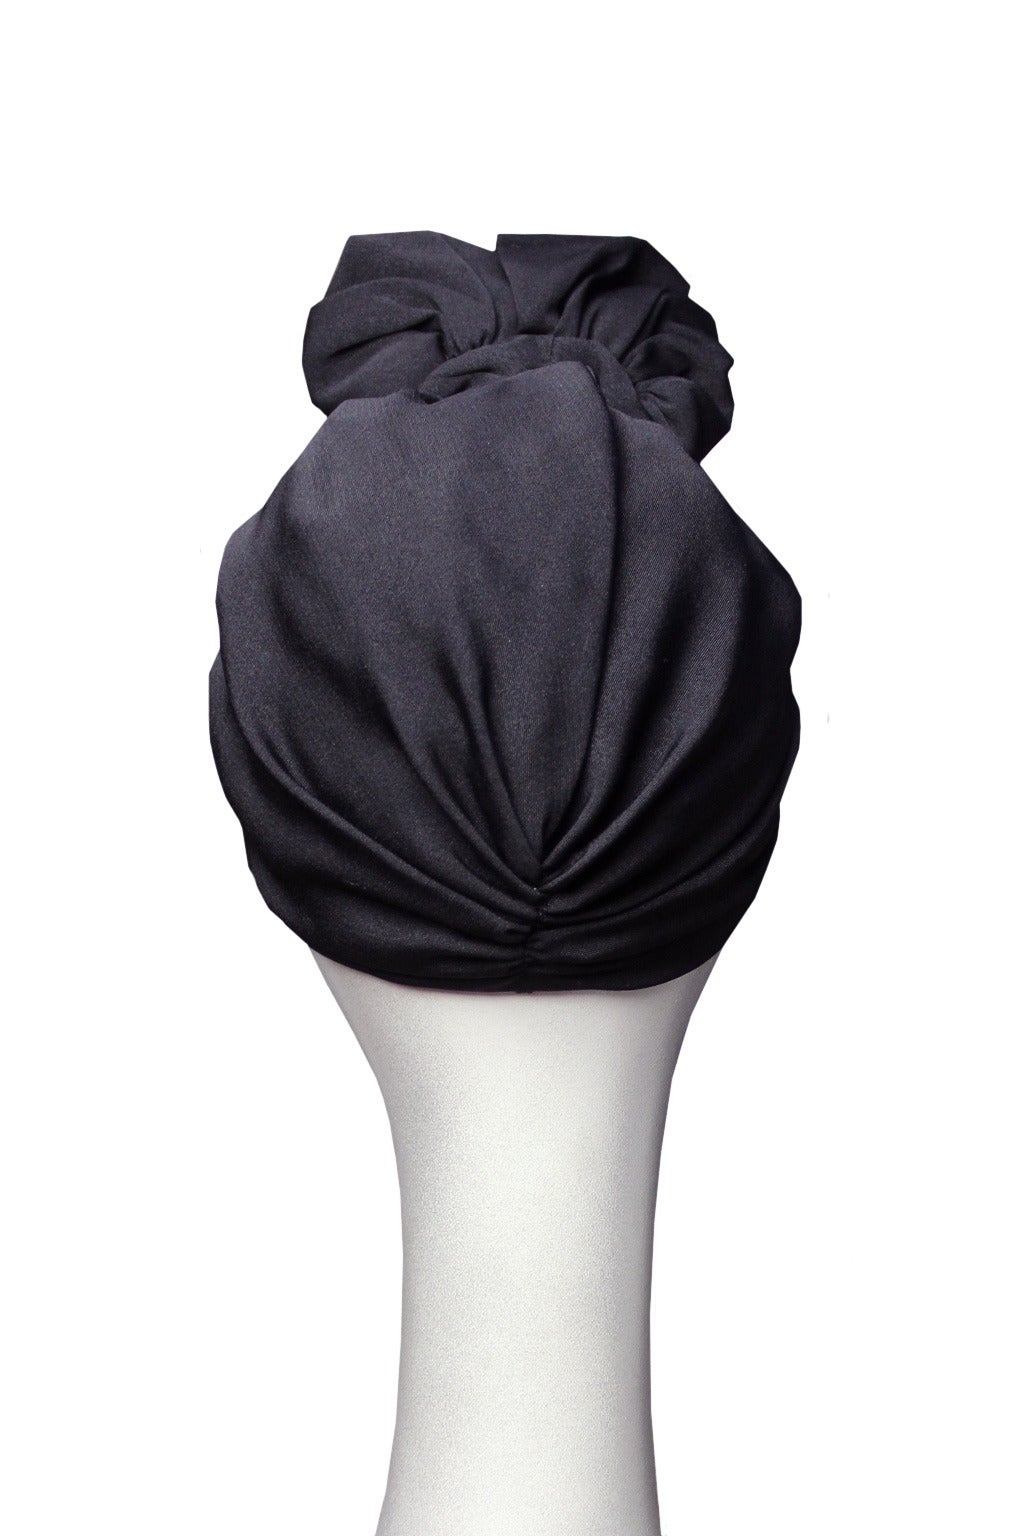 Norma Kamali 1970s Exaggerated Turban In Excellent Condition In New York, NY